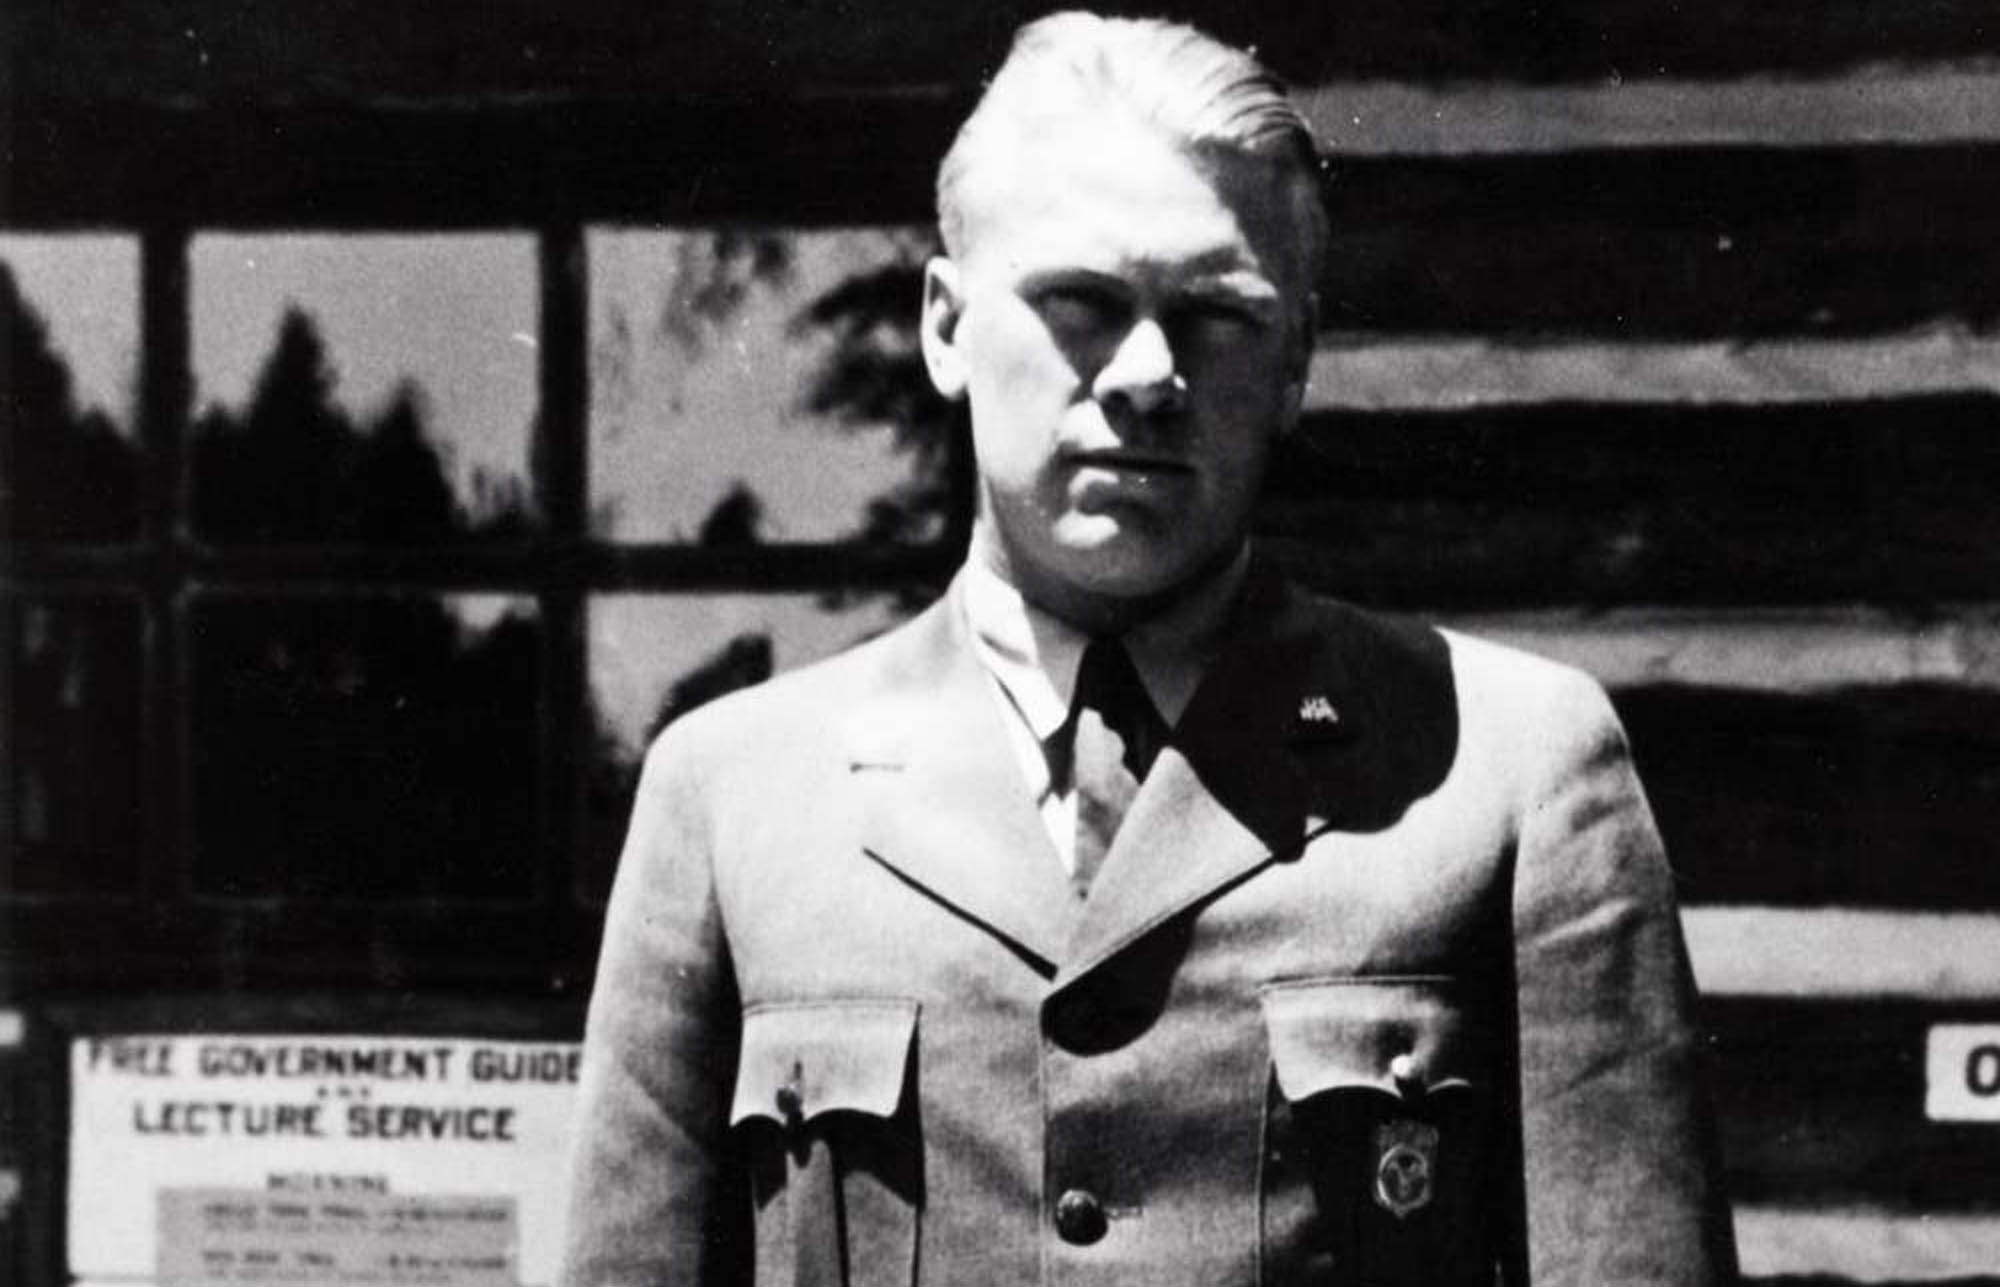 Gerald Ford poses in front of a log building while wearing the NPS uniform with shield-shaped badge and holding a broad brim hat.